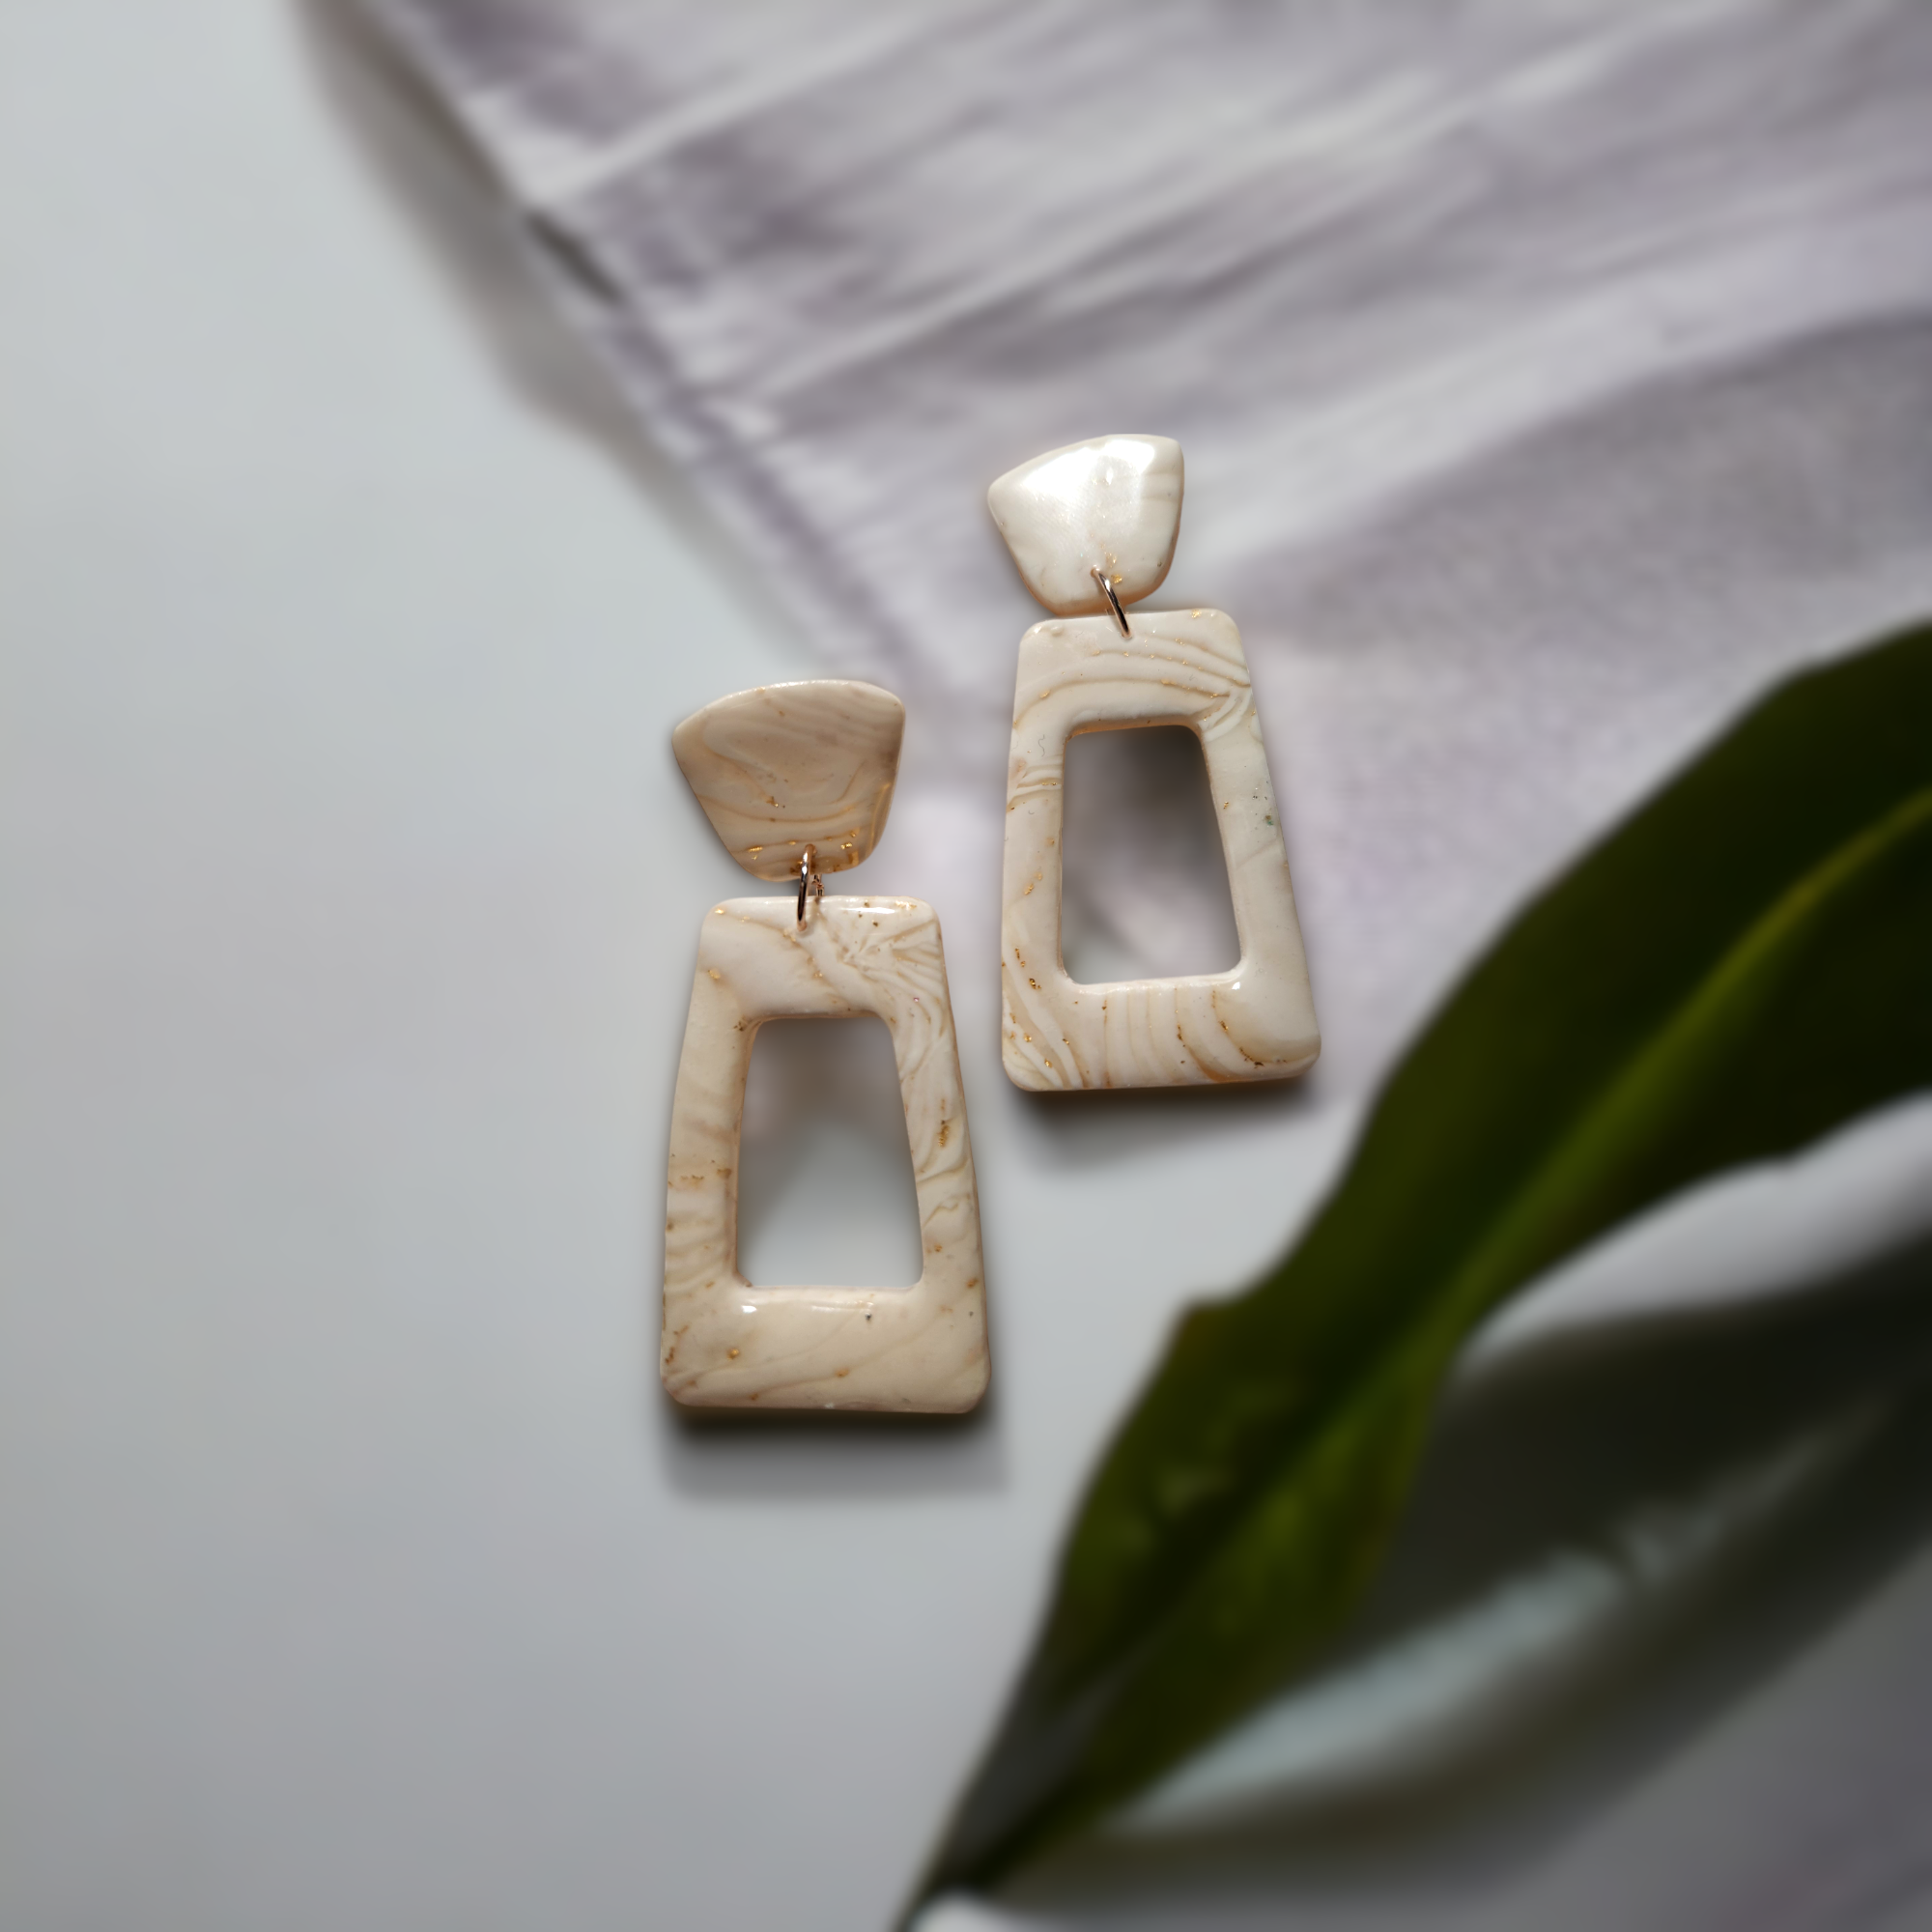 I made these earrings with polymer clay, uv resin and acrylic gold